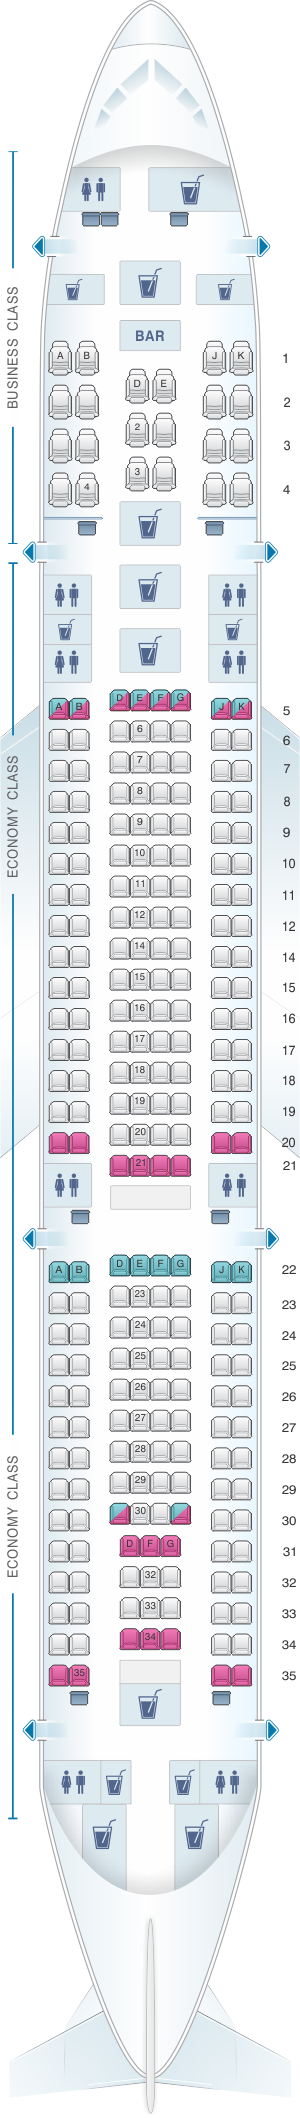 Seat map for Turkish Airlines Airbus A330 200